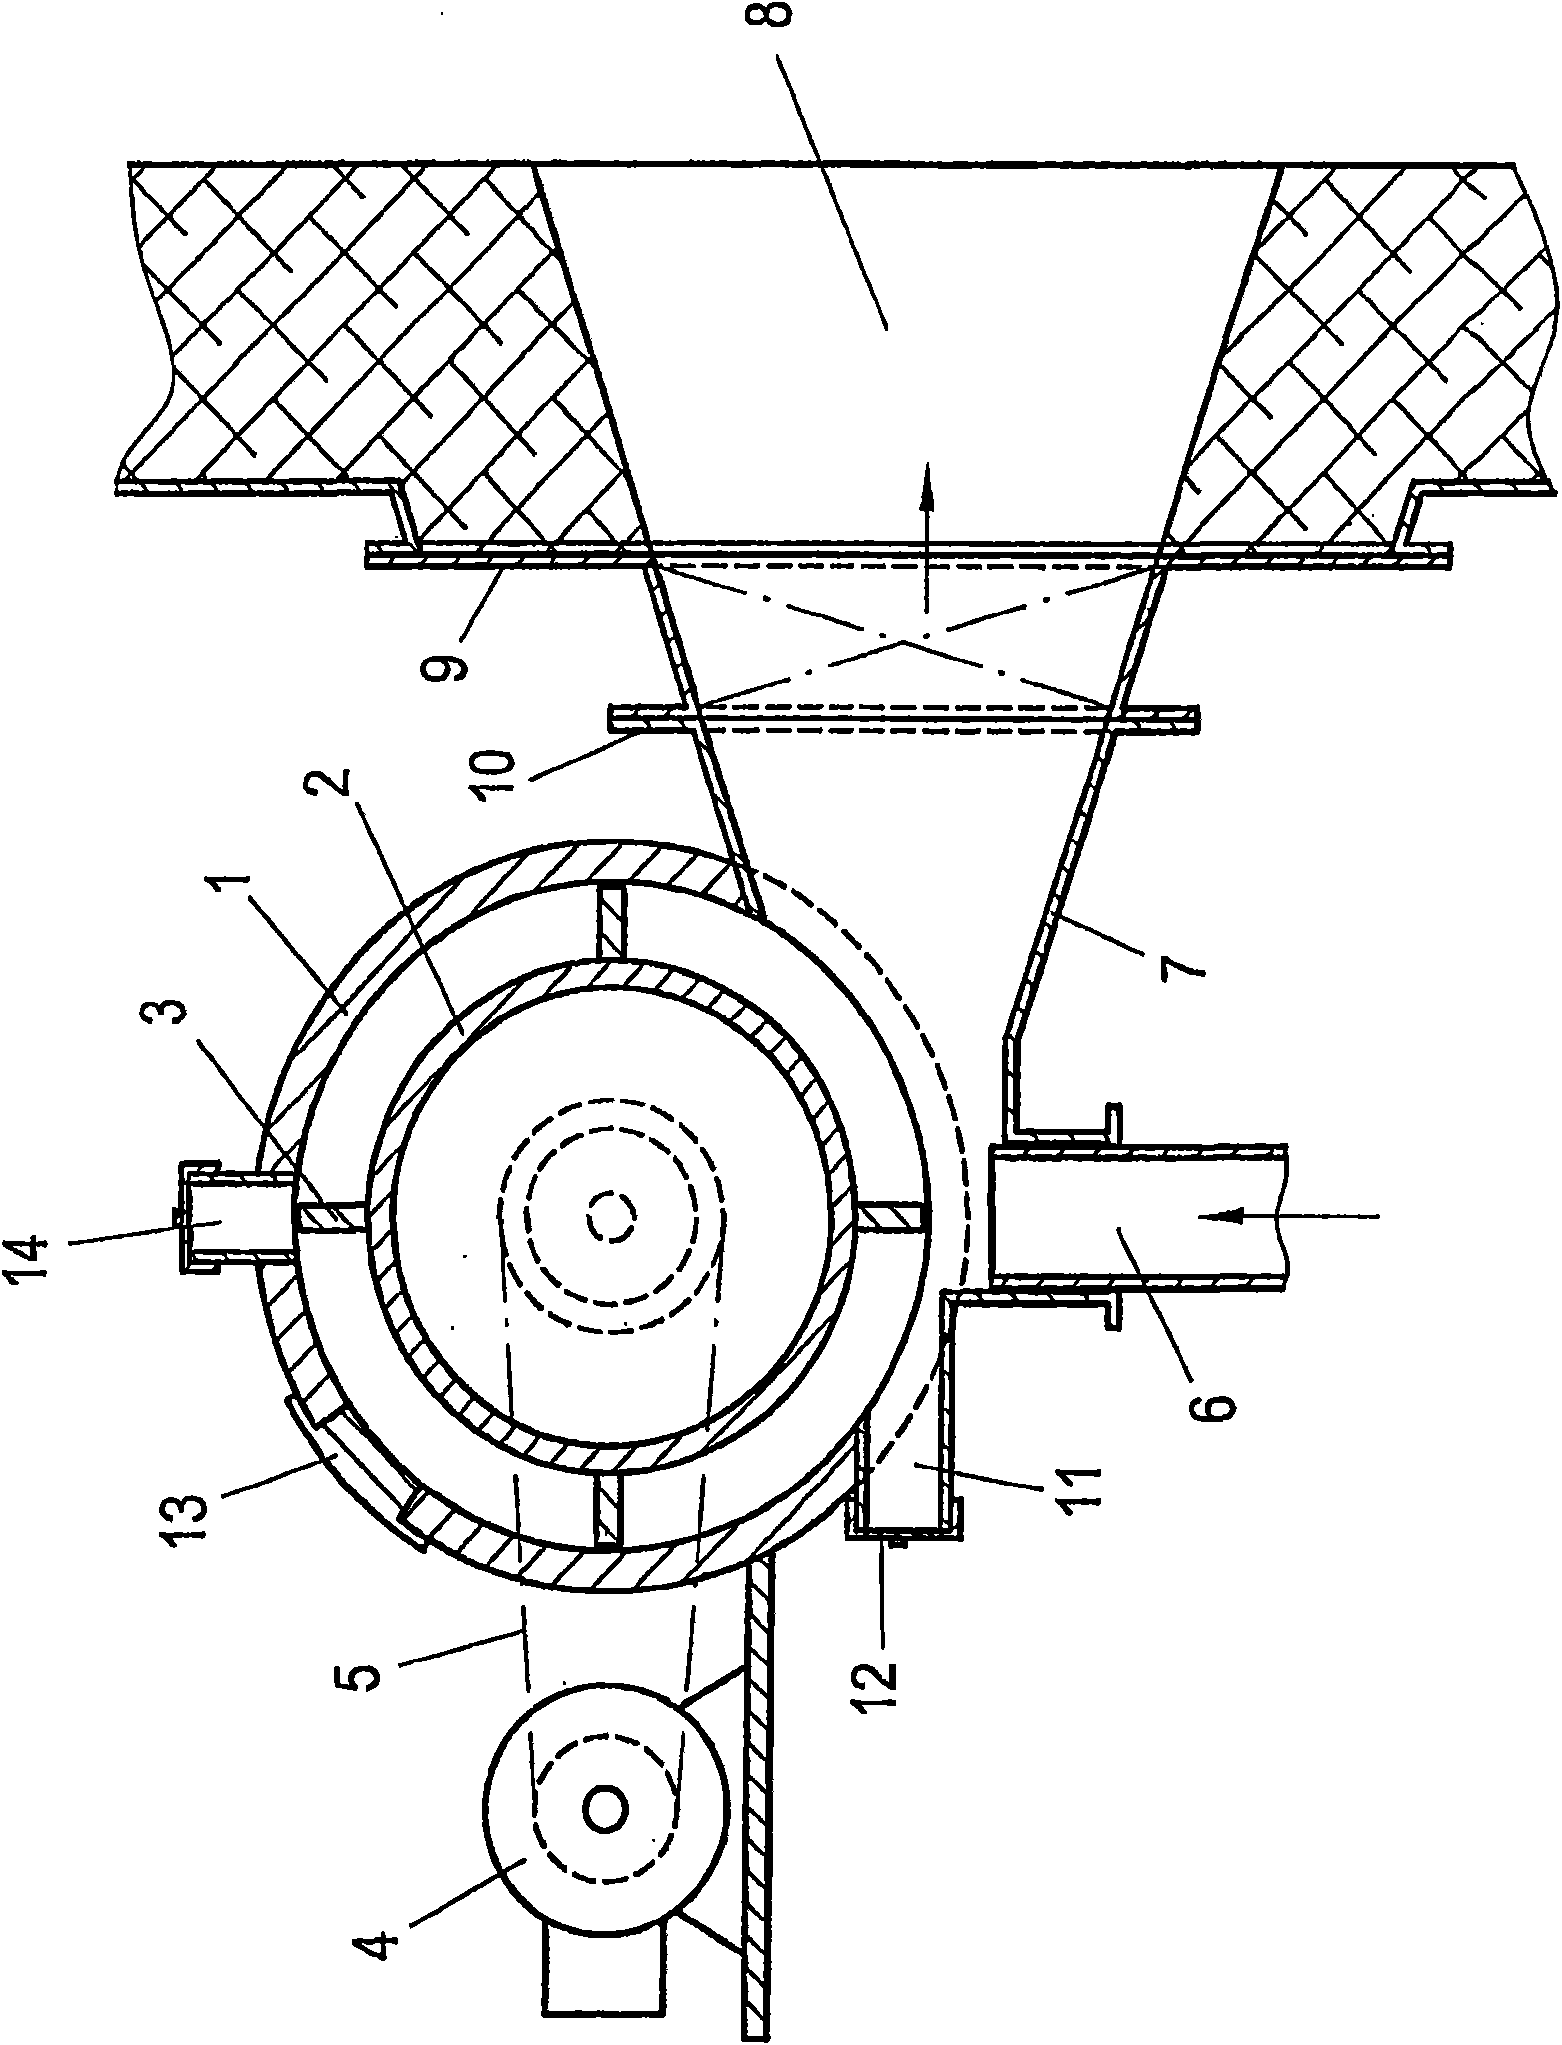 Method for introducing waste and/or alternative fuels into a clinker production method and device for carrying out said method